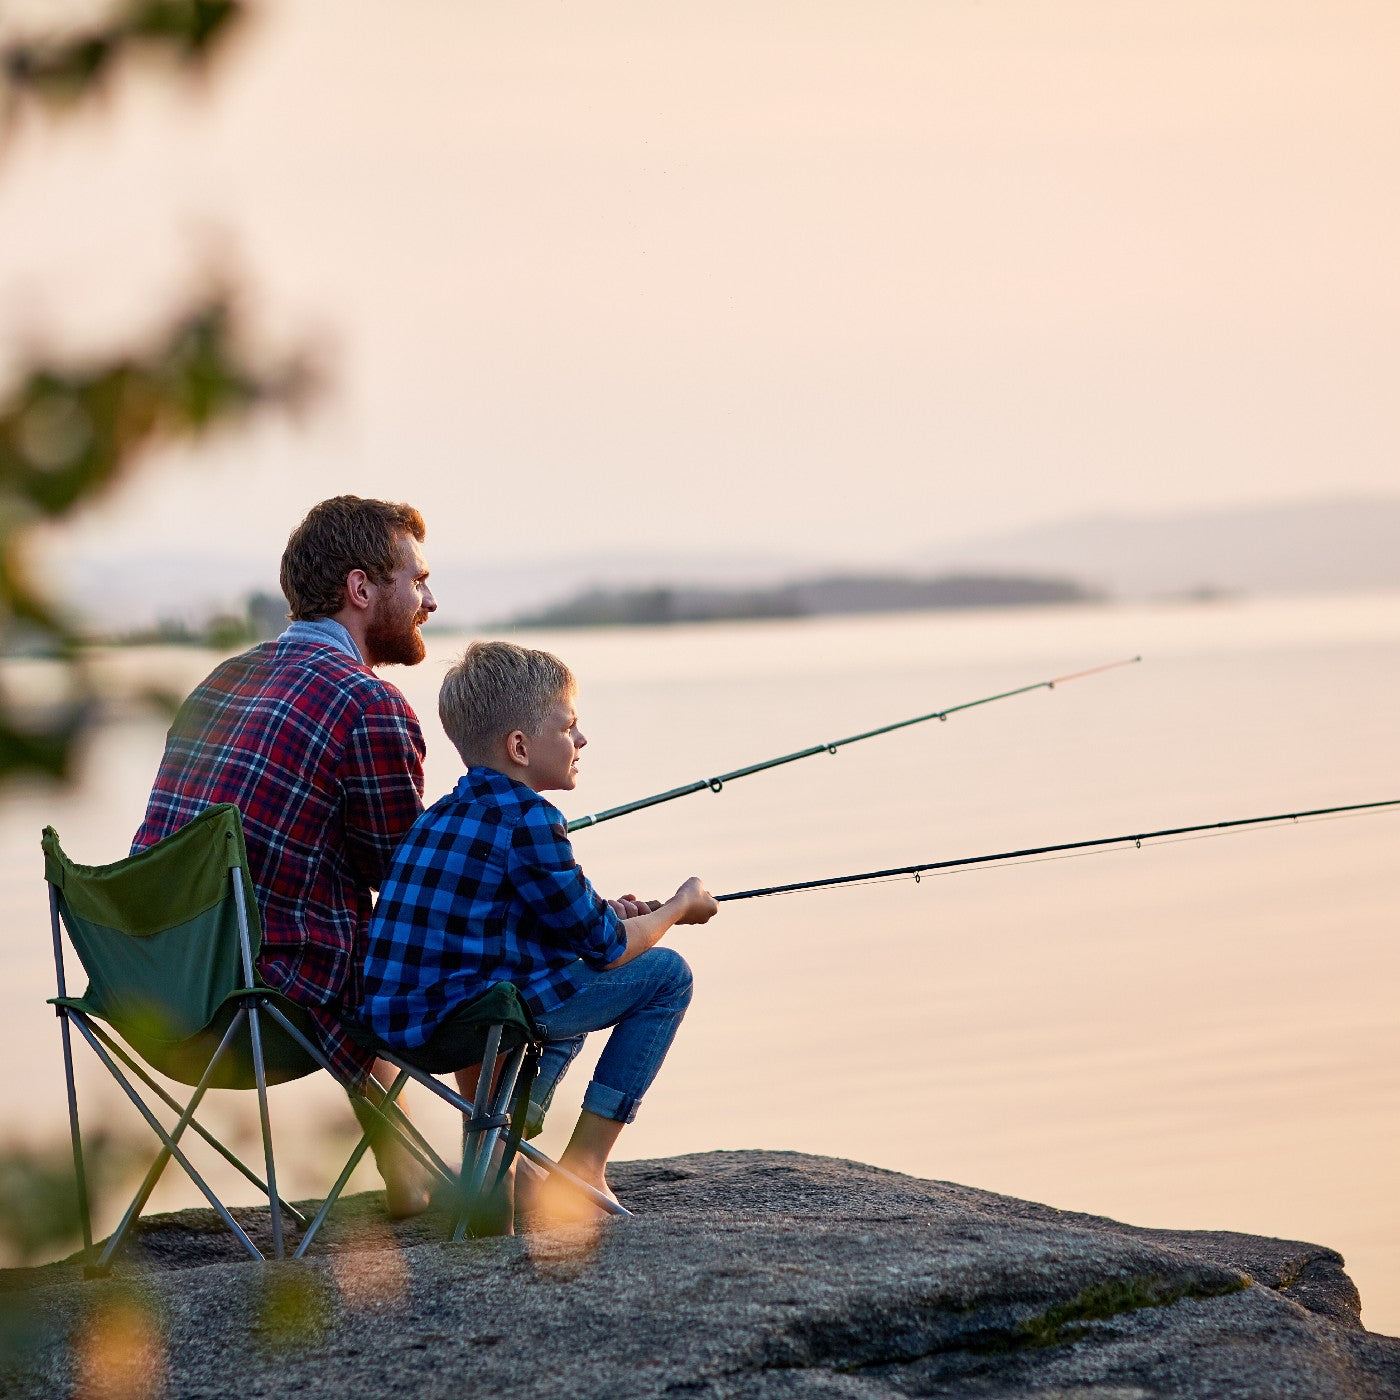 Man fishing with his son